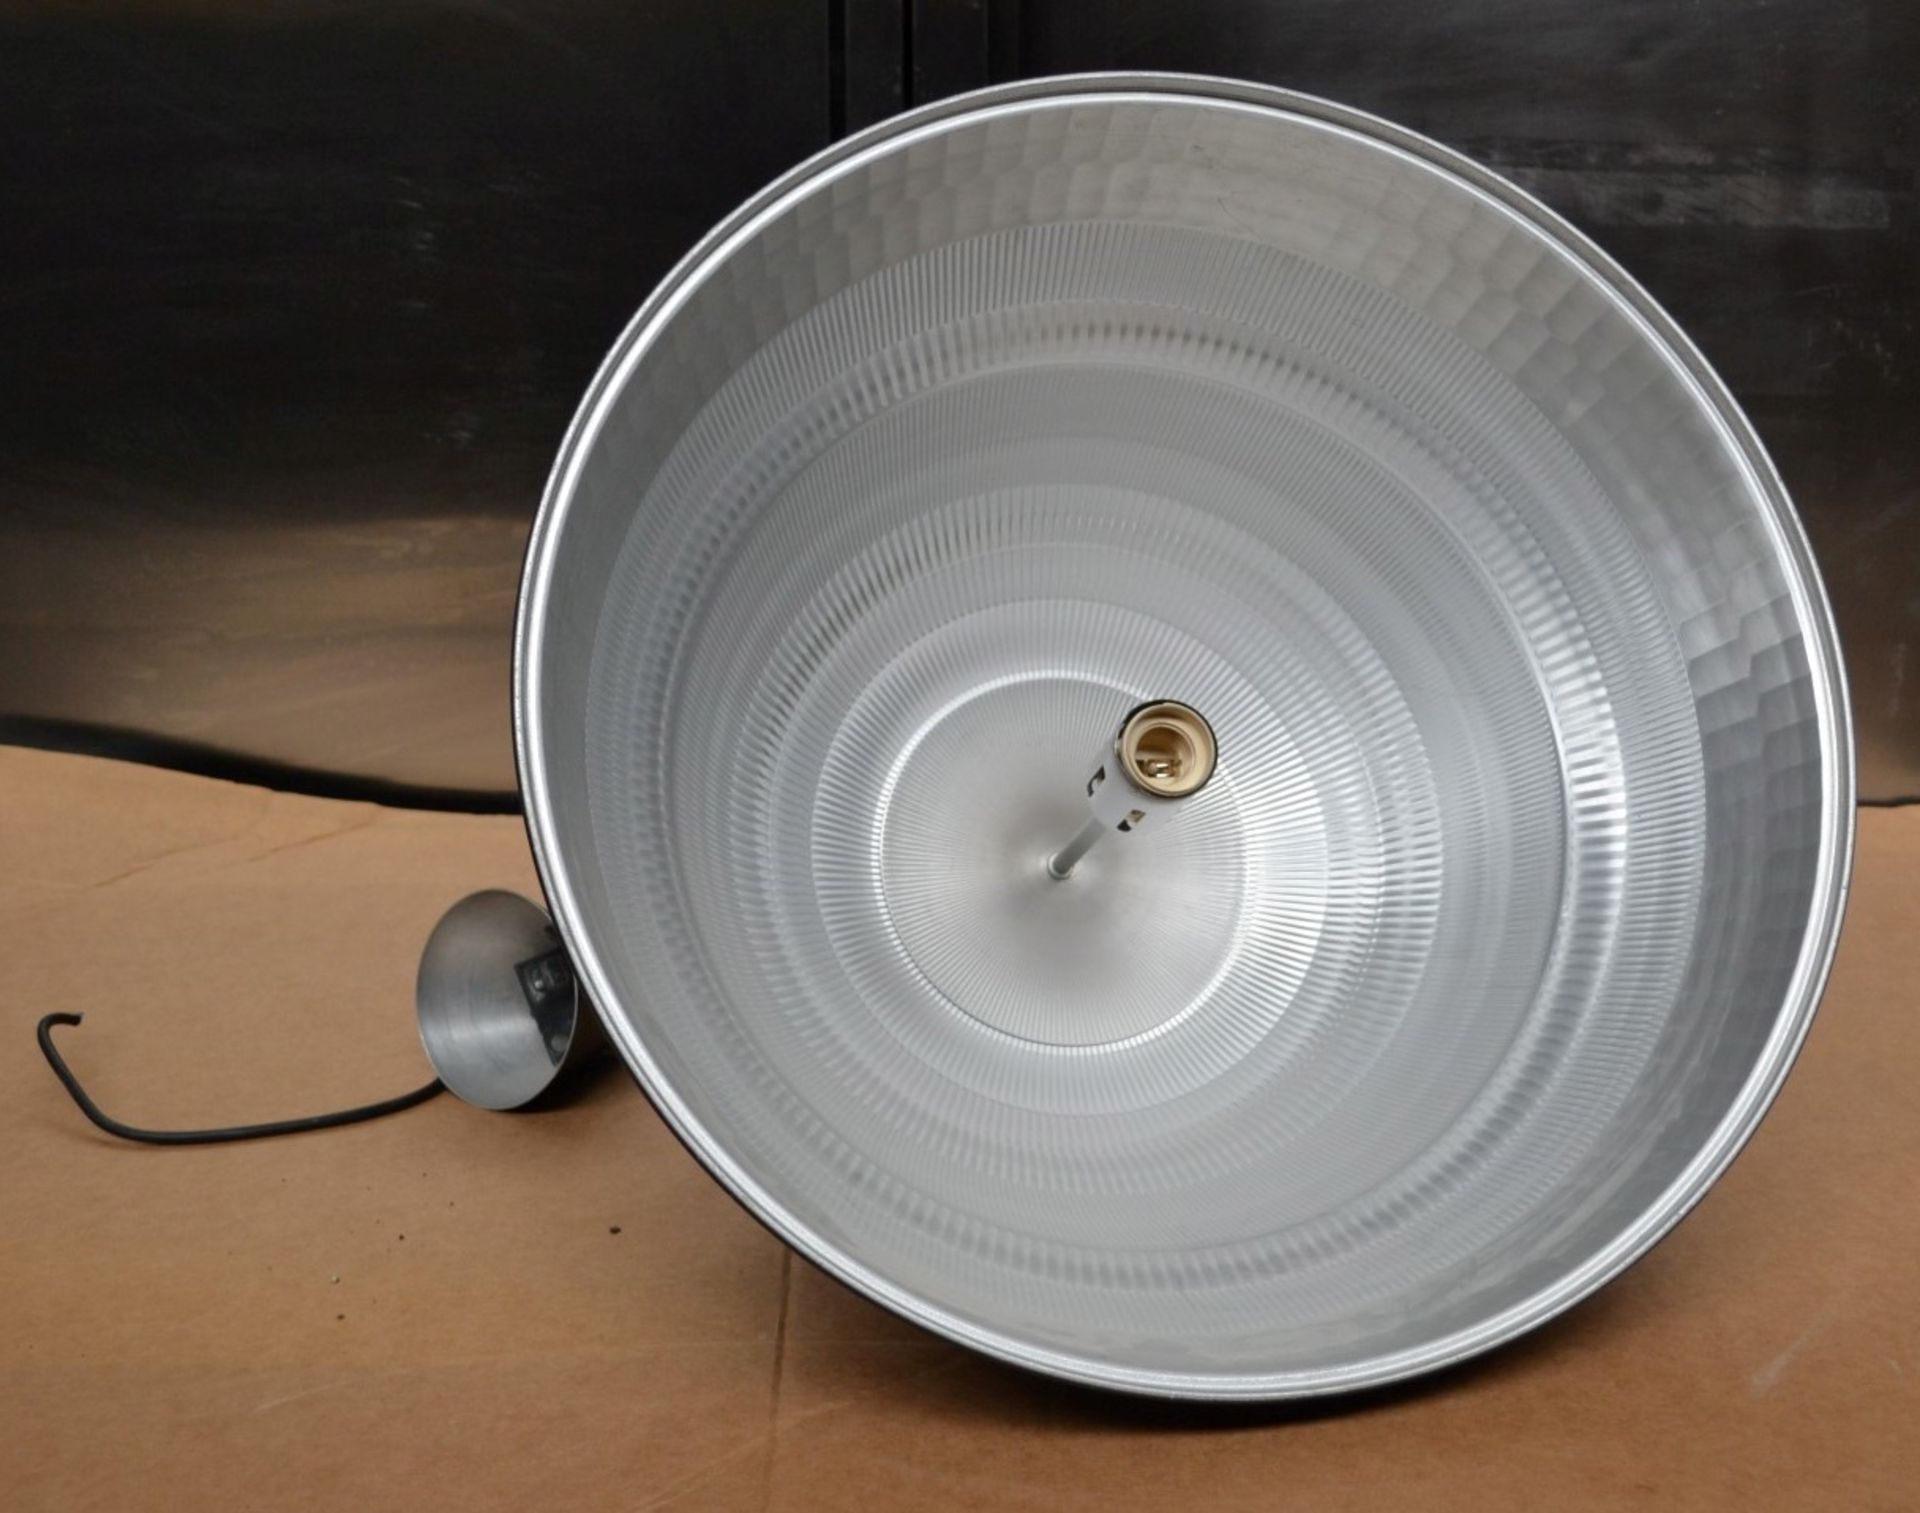 7 x Large Retro Industrial-style Pendant Ceiling Light Fittings - Colour: Black / White - Stylish - Image 2 of 3